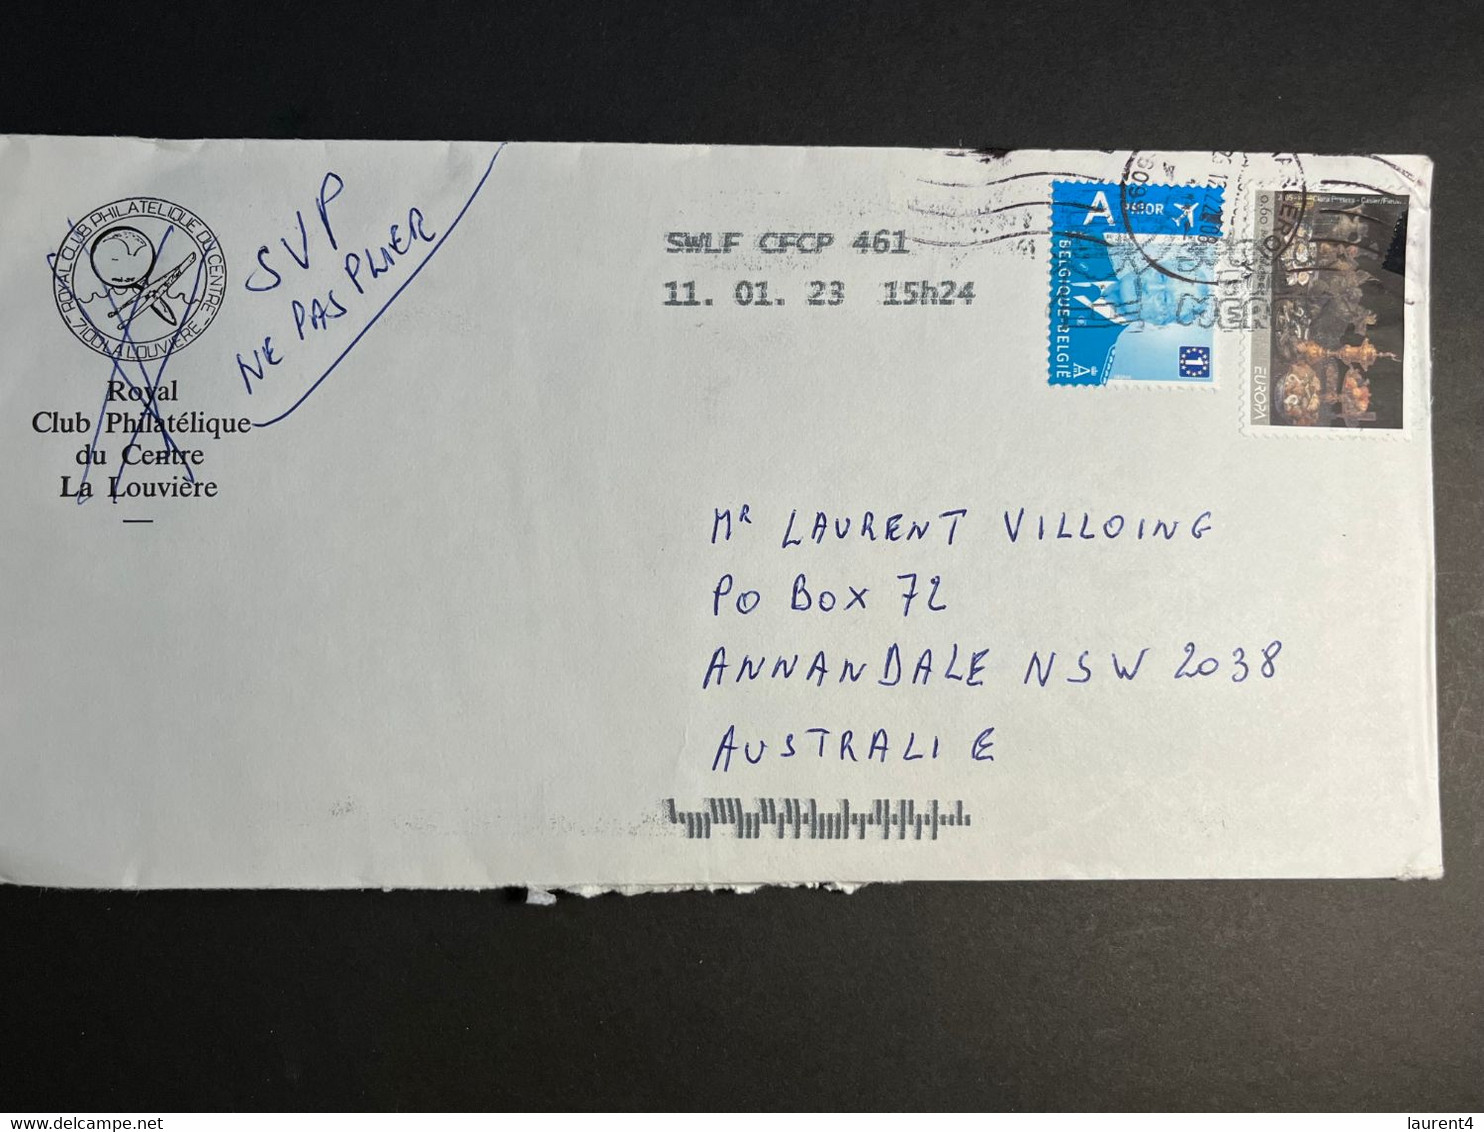 (1 N 49) Letter Posted From Belgium To Australia (during COVID-19 Pandemic) With EUROPA Stamp - Lettres & Documents